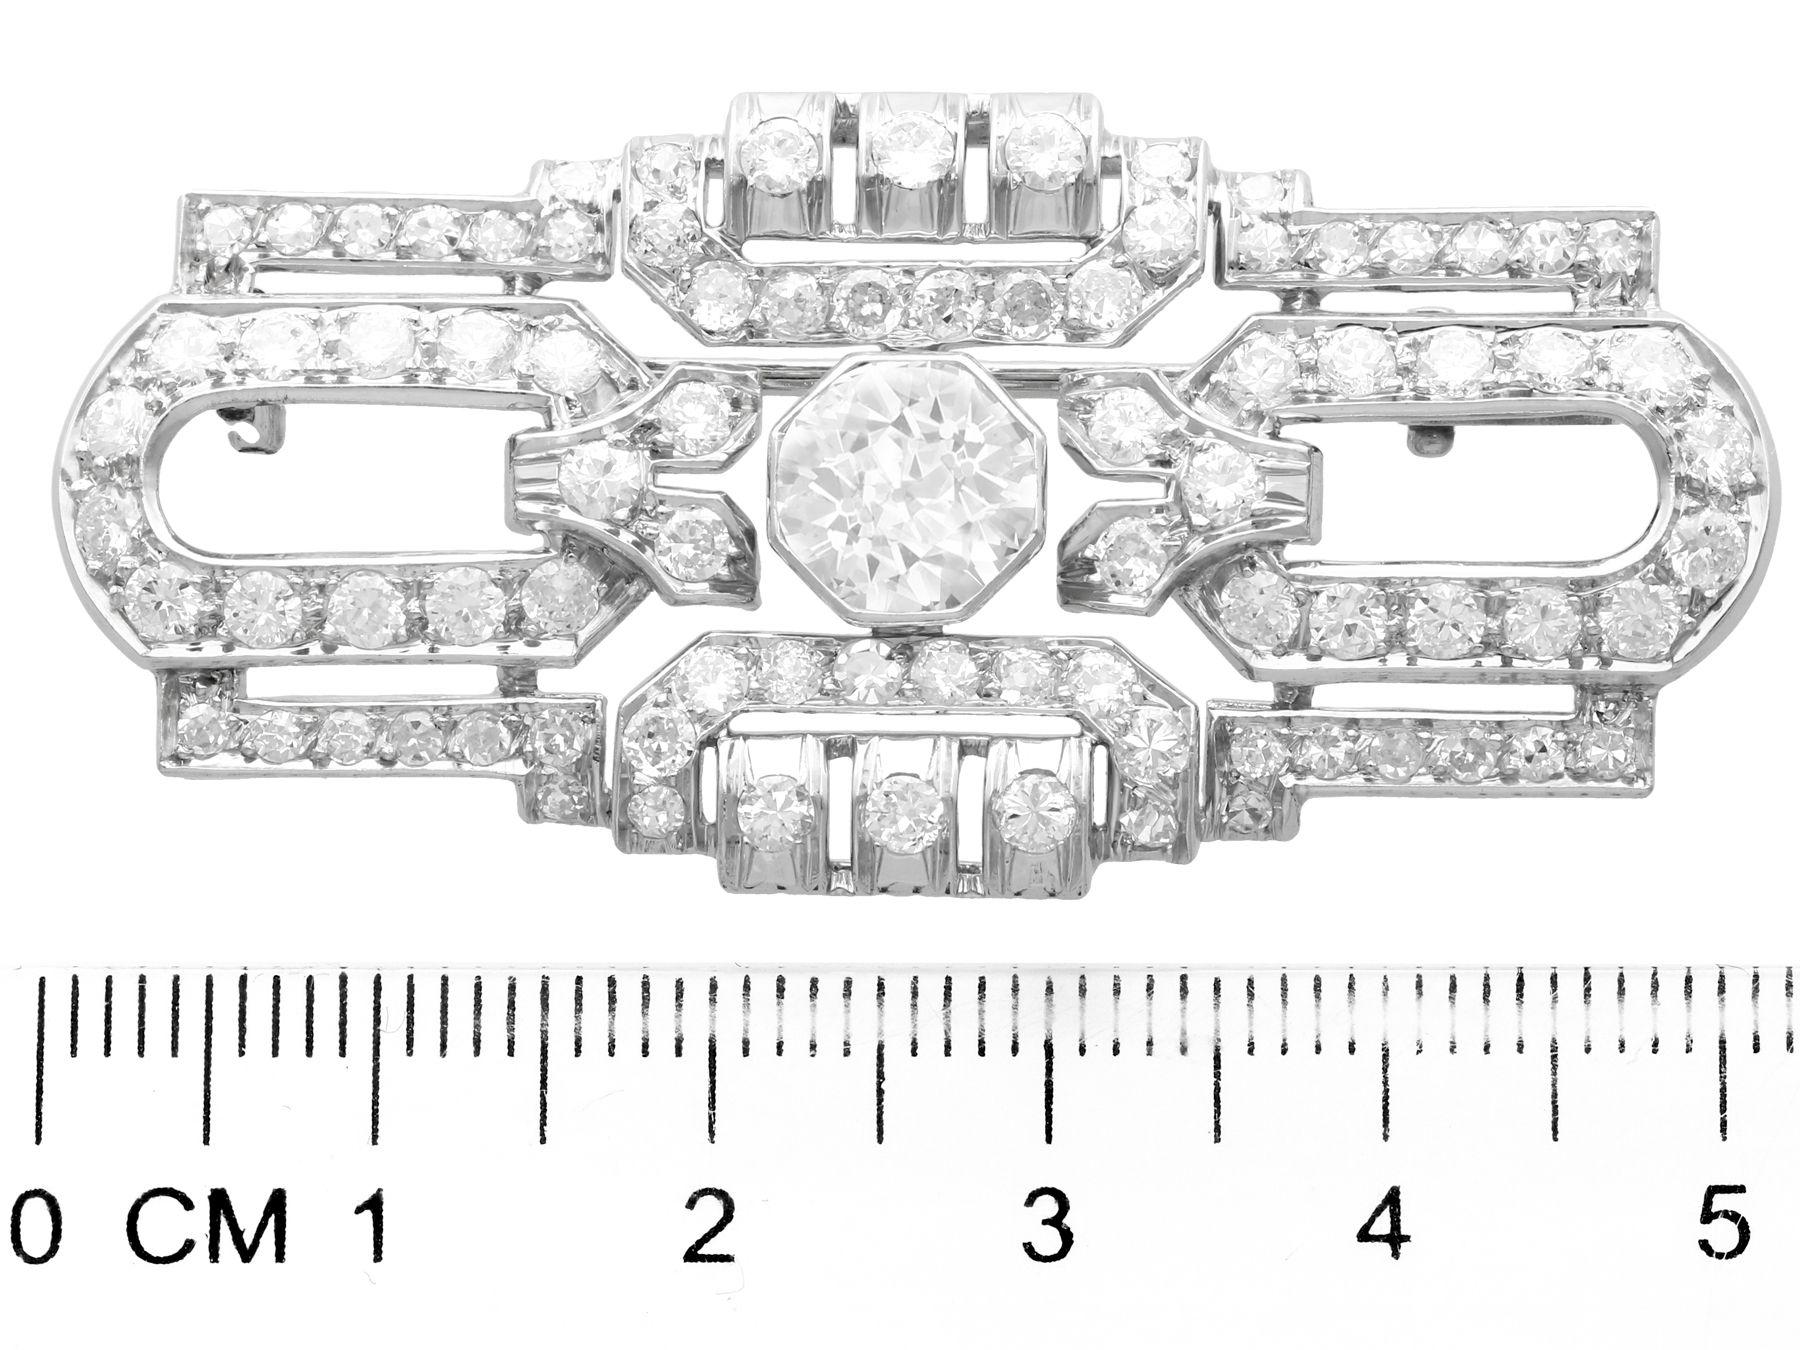 Antique French Art Deco 5.44 Carat Diamond and Platinum Brooch For Sale 2